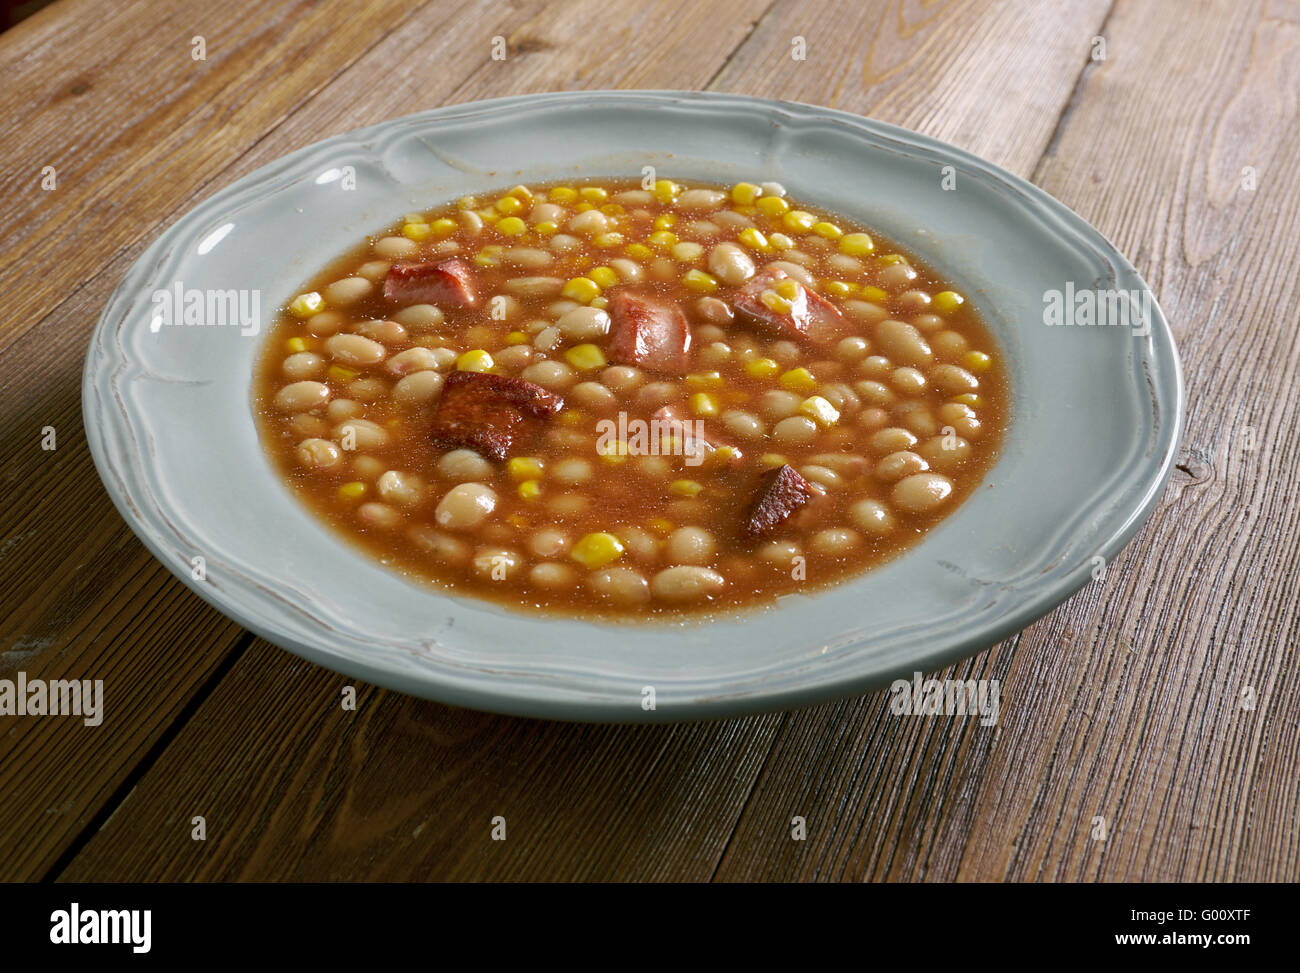 Tihove - Stew of corn beans and peanut butter.African cuisine